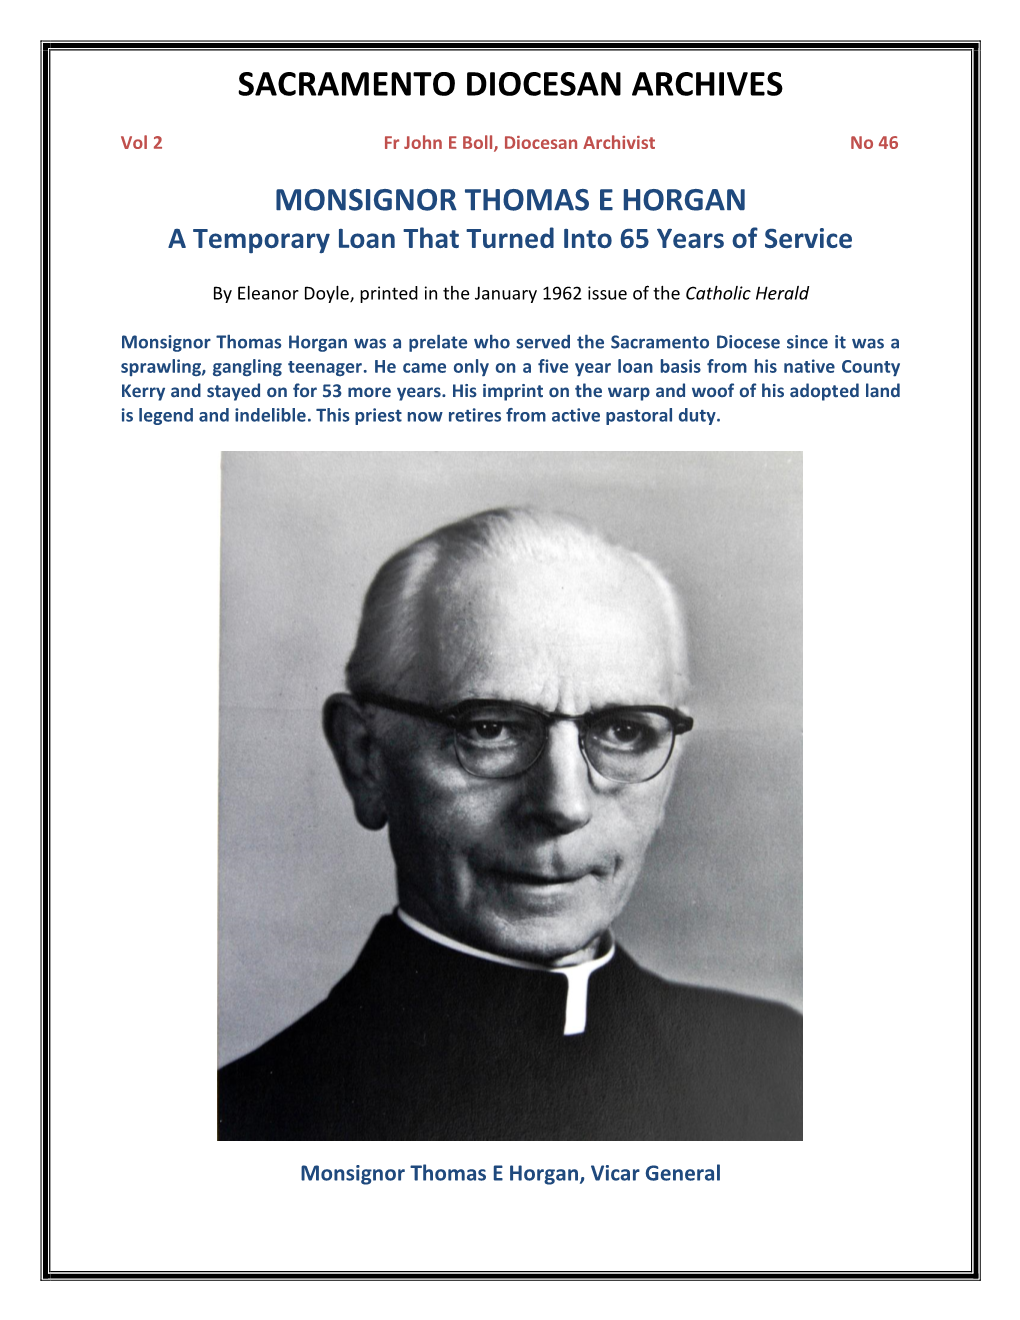 MONSIGNOR THOMAS E HORGAN a Temporary Loan That Turned Into 65 Years of Service